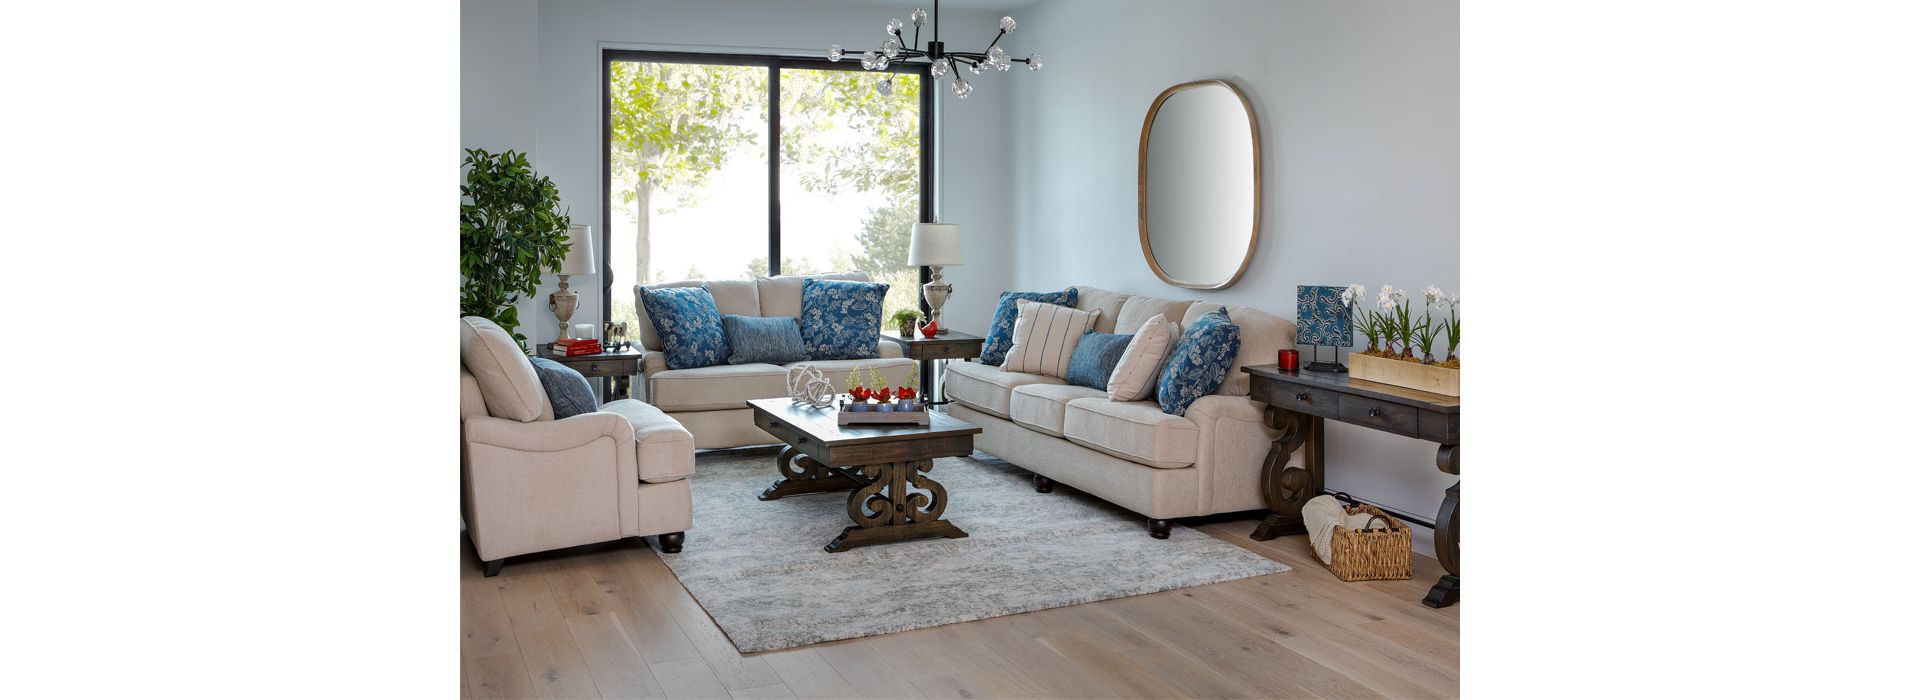 Cream Colored Sofa Set with Blue Floral Pillows in Living Room